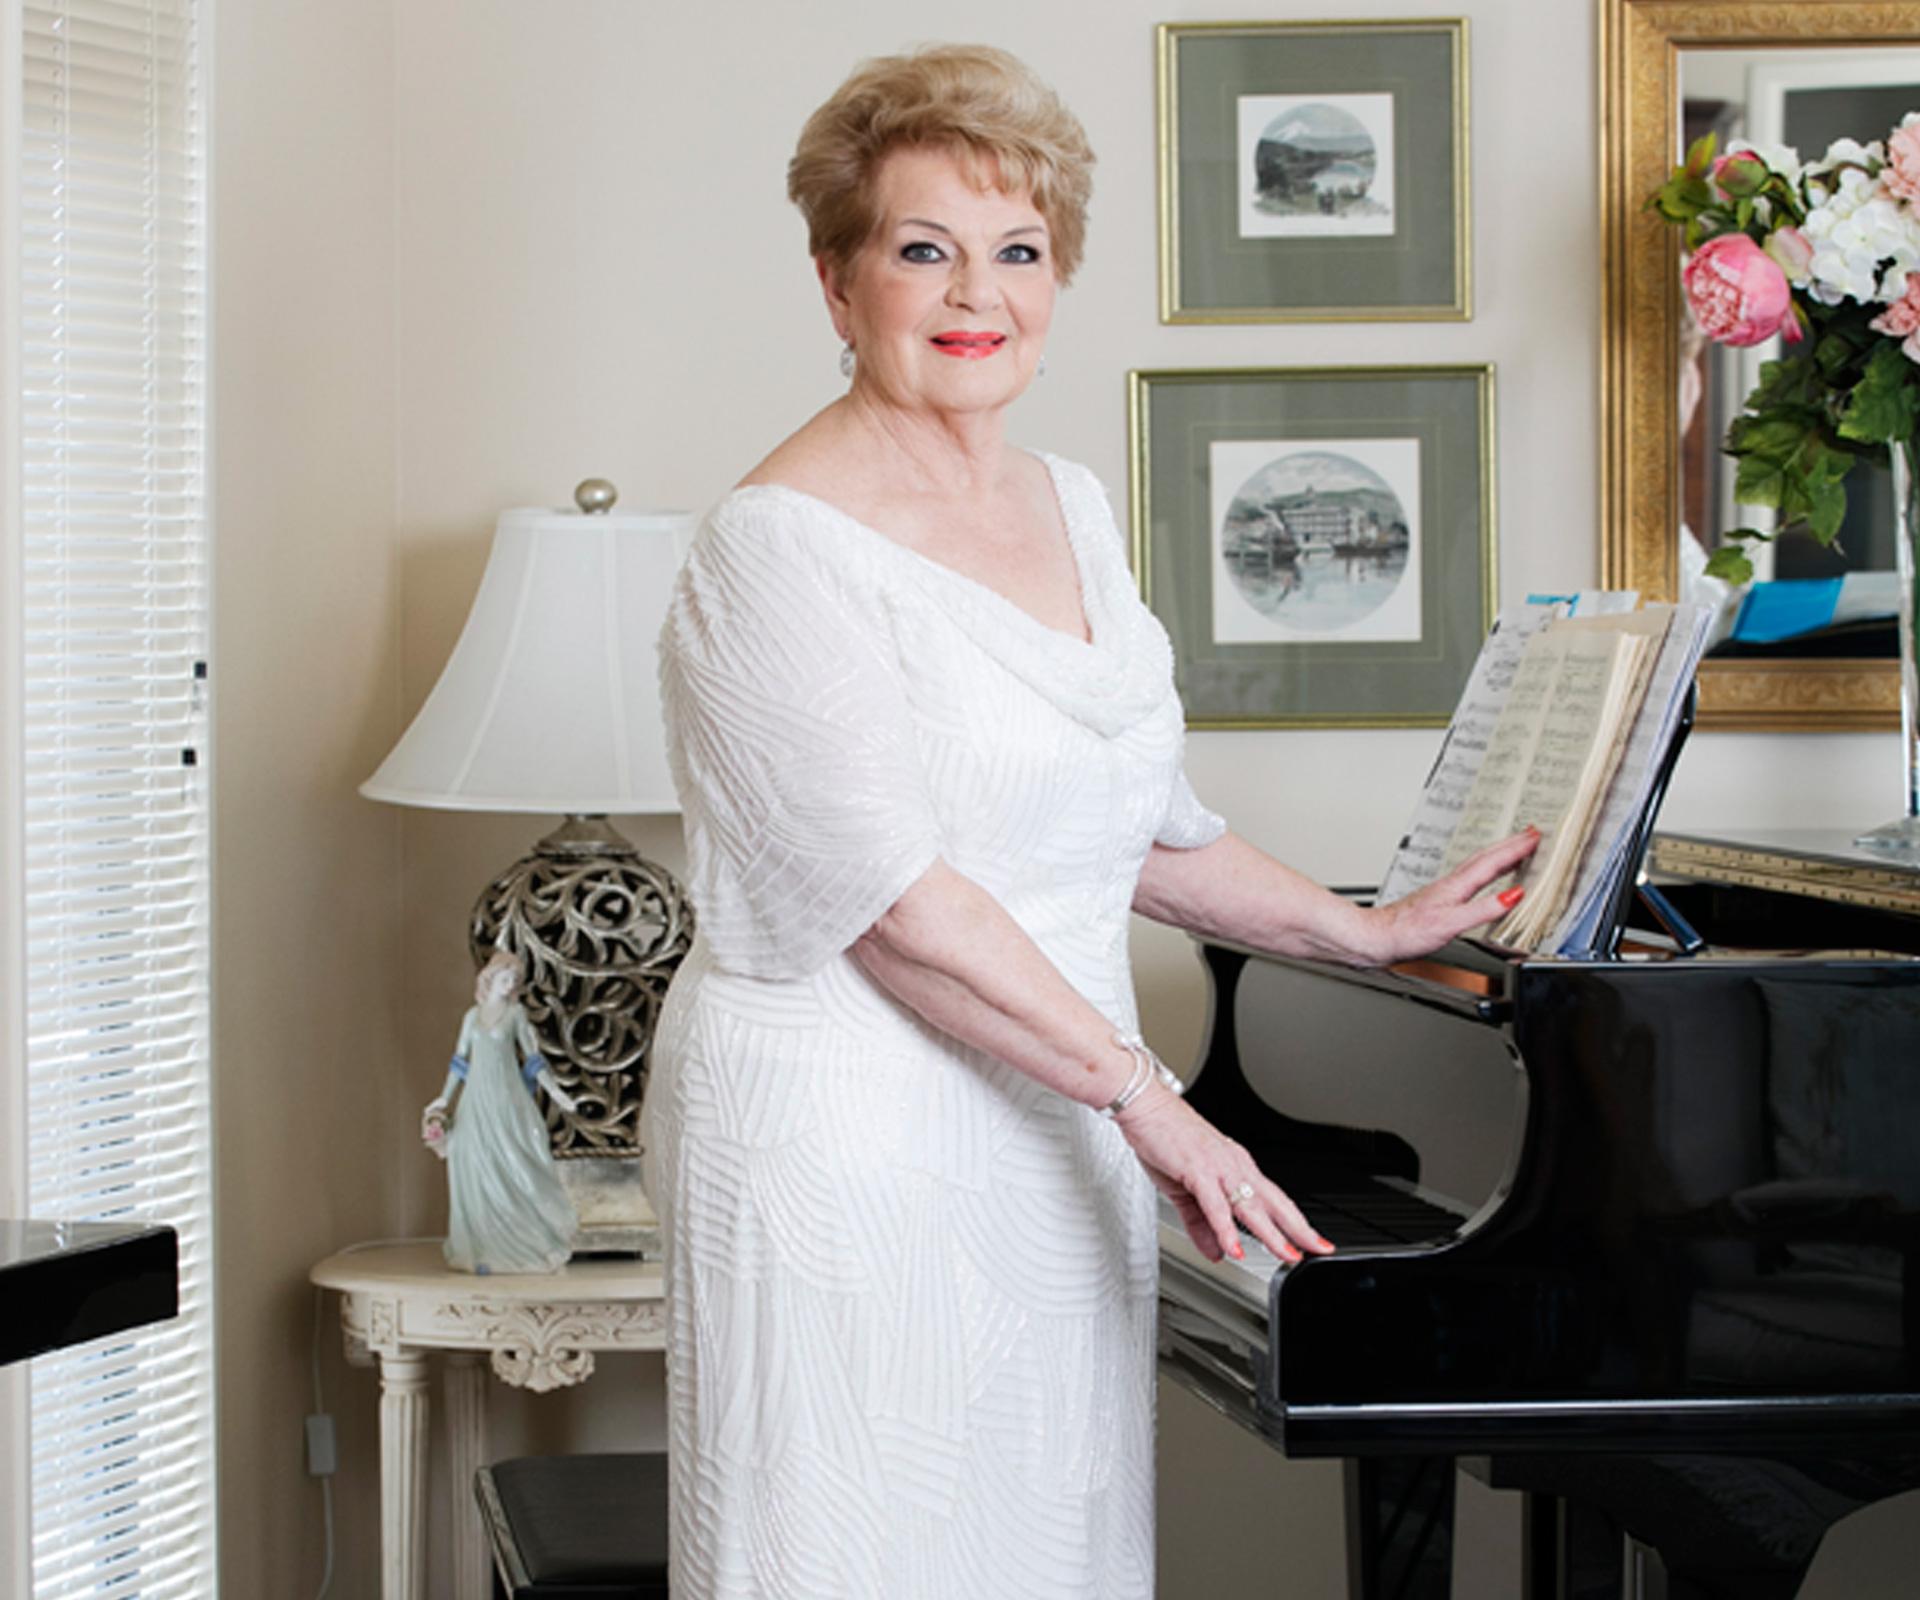 Now 72, the opera diva Dame Malvina, believes her voice had improved with age.